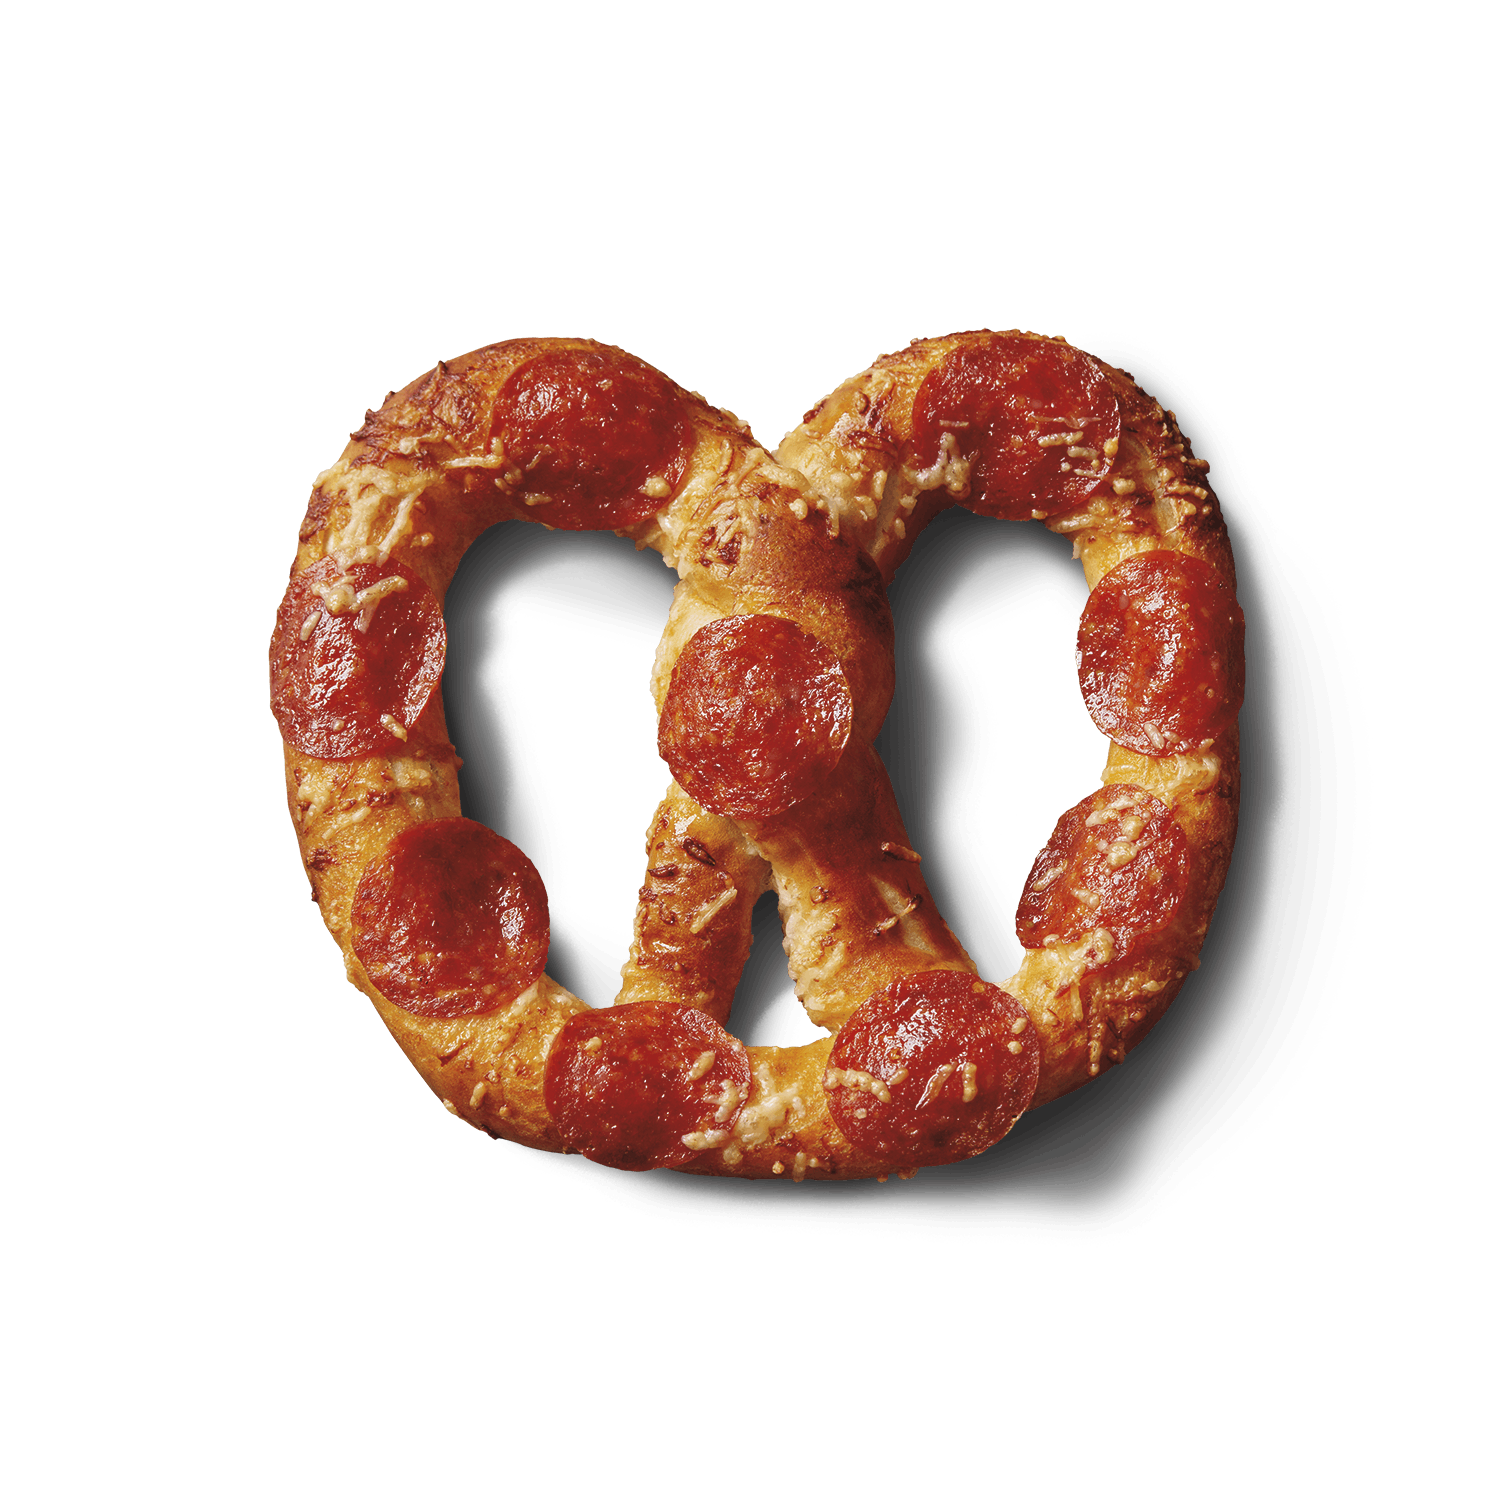 Pepperoni Pretzel from Auntie Anne's - Bay Park Square in Green Bay, WI